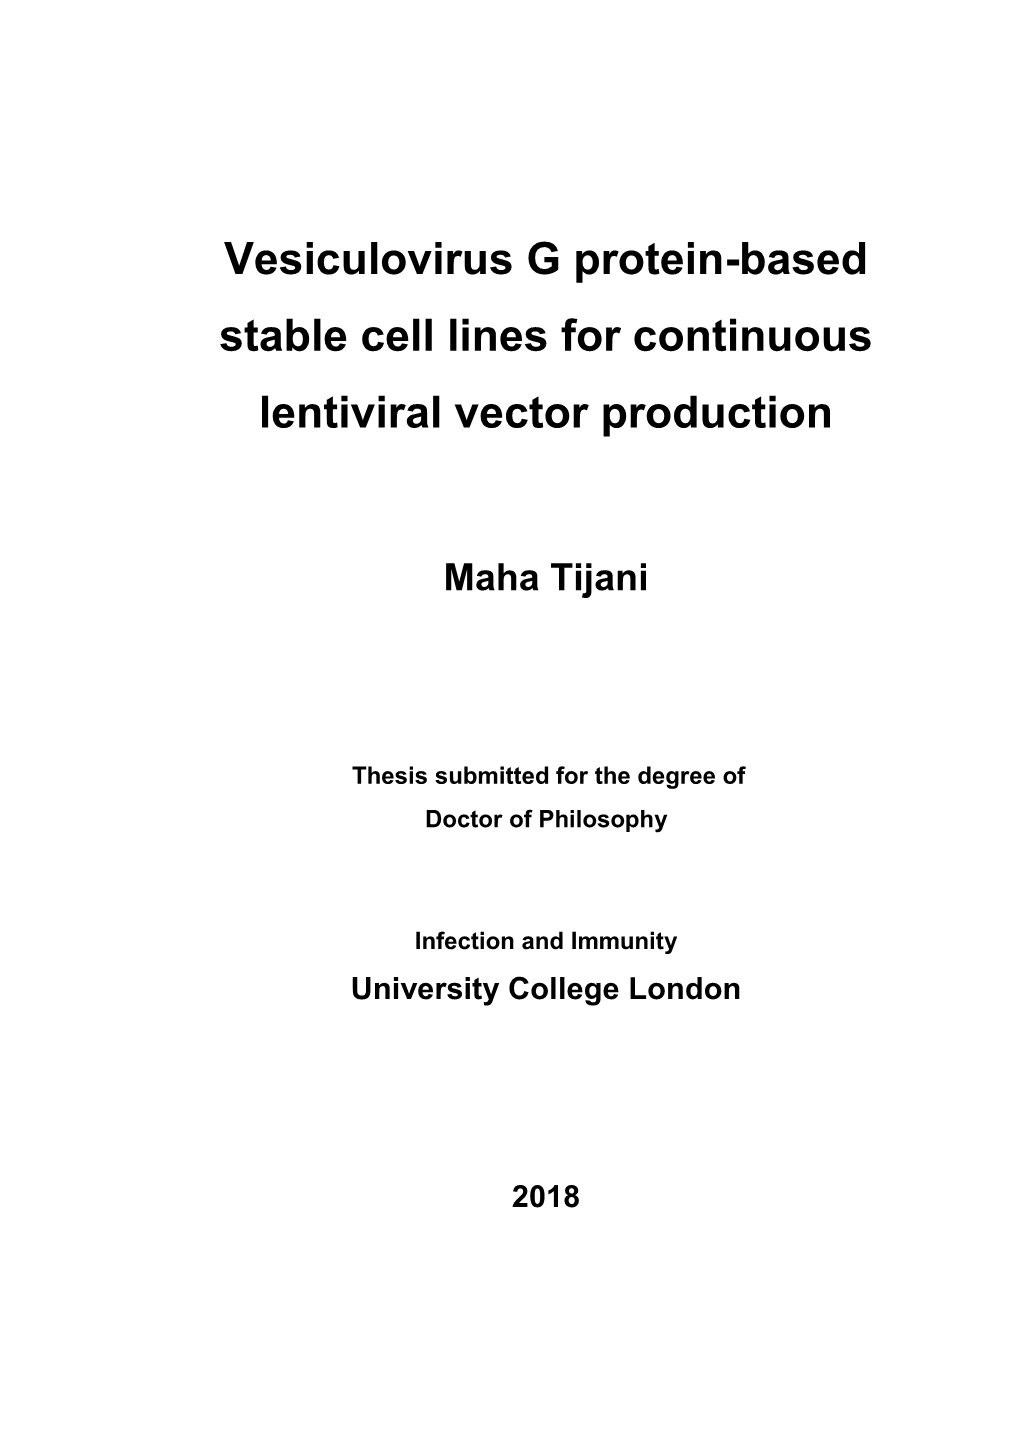 Vesiculovirus G Protein-Based Stable Cell Lines for Continuous Lentiviral Vector Production